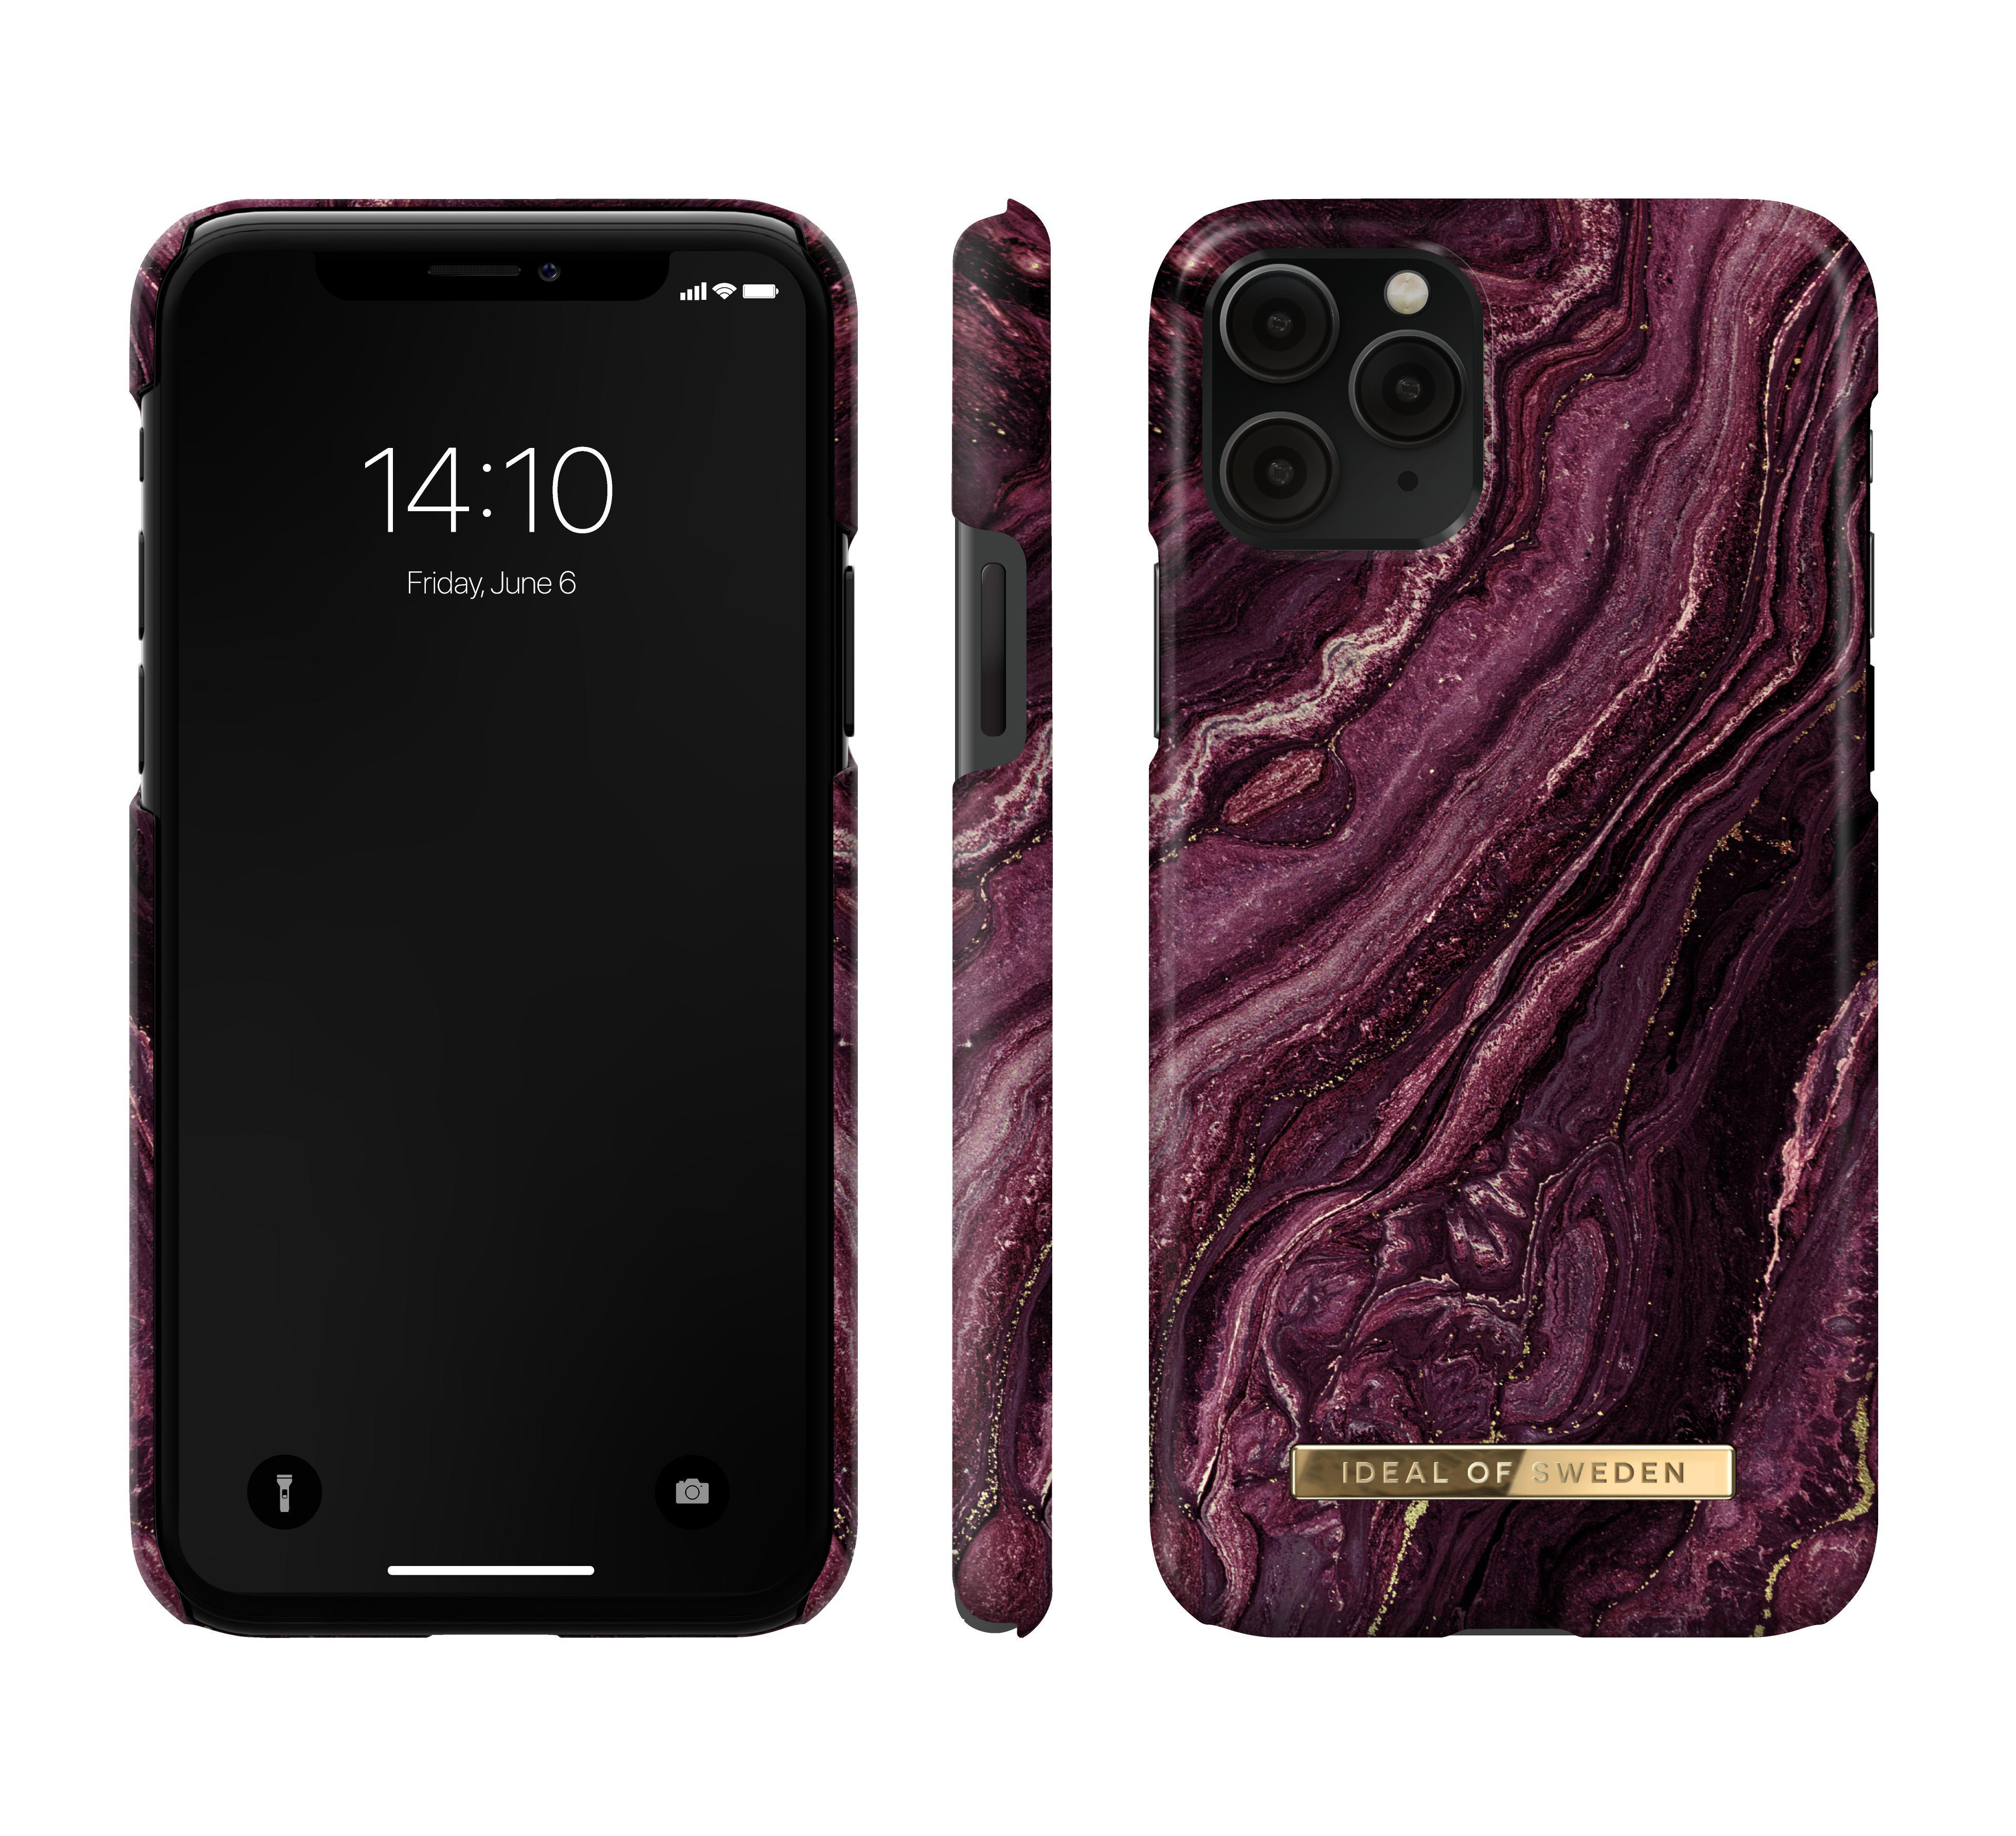 iPhone IDEAL X, OF Backcover, XS, Apple, SWEDEN Purple iPhone iPhone 11 Pro, Fashion,